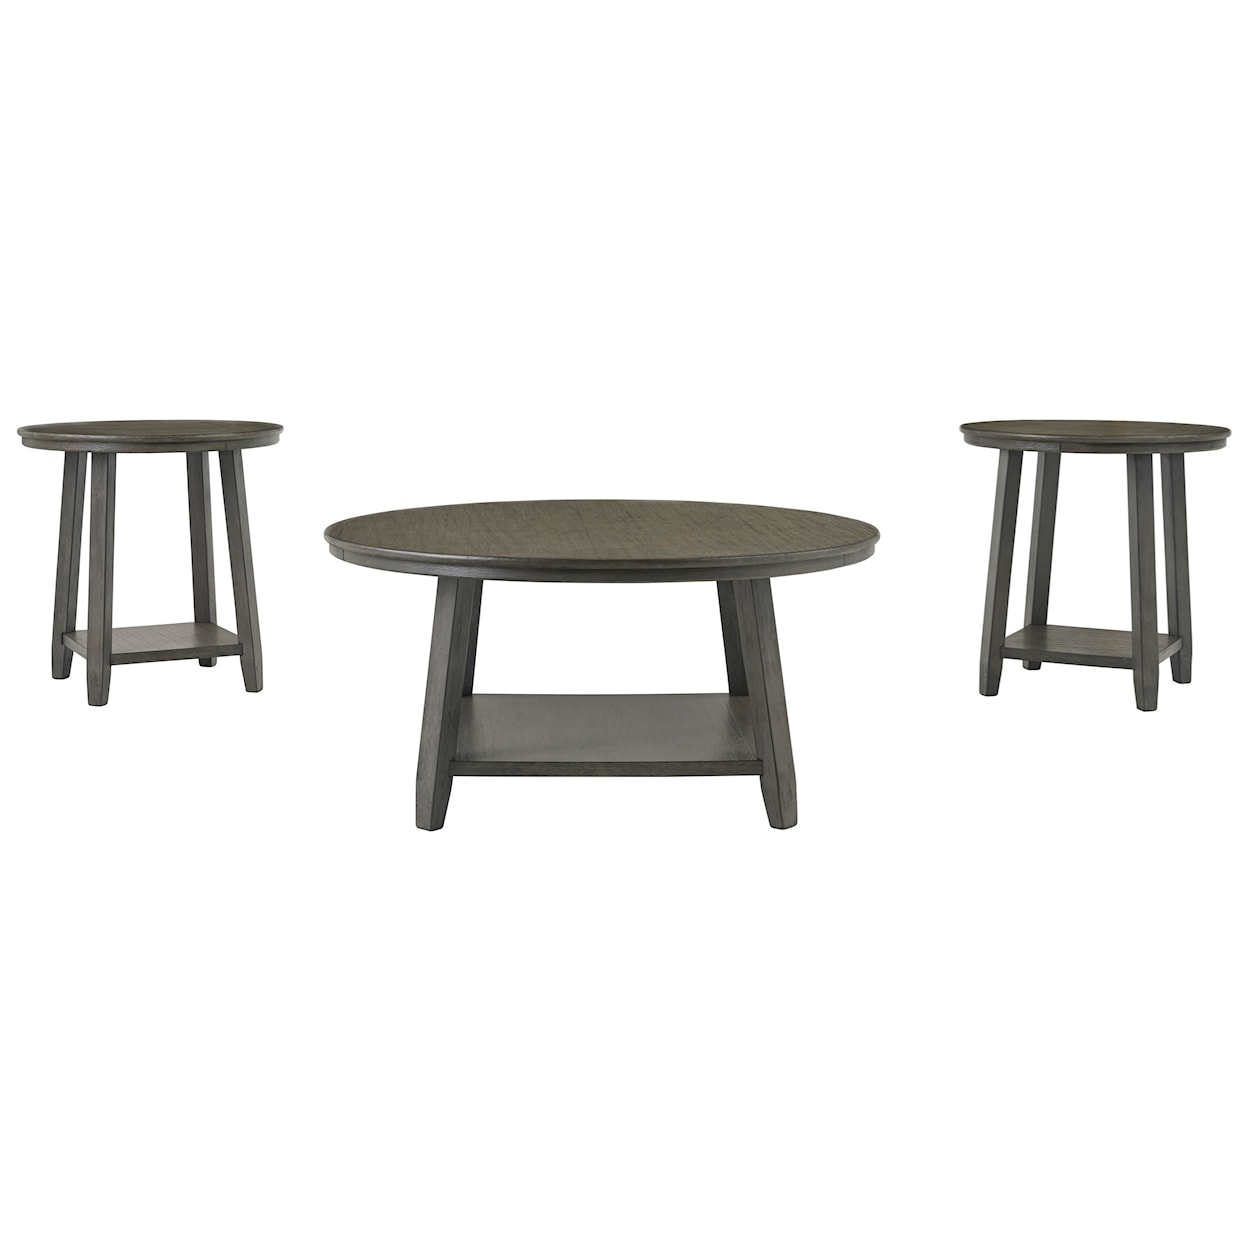 Benchcraft Caitbrook Occasional Table Set